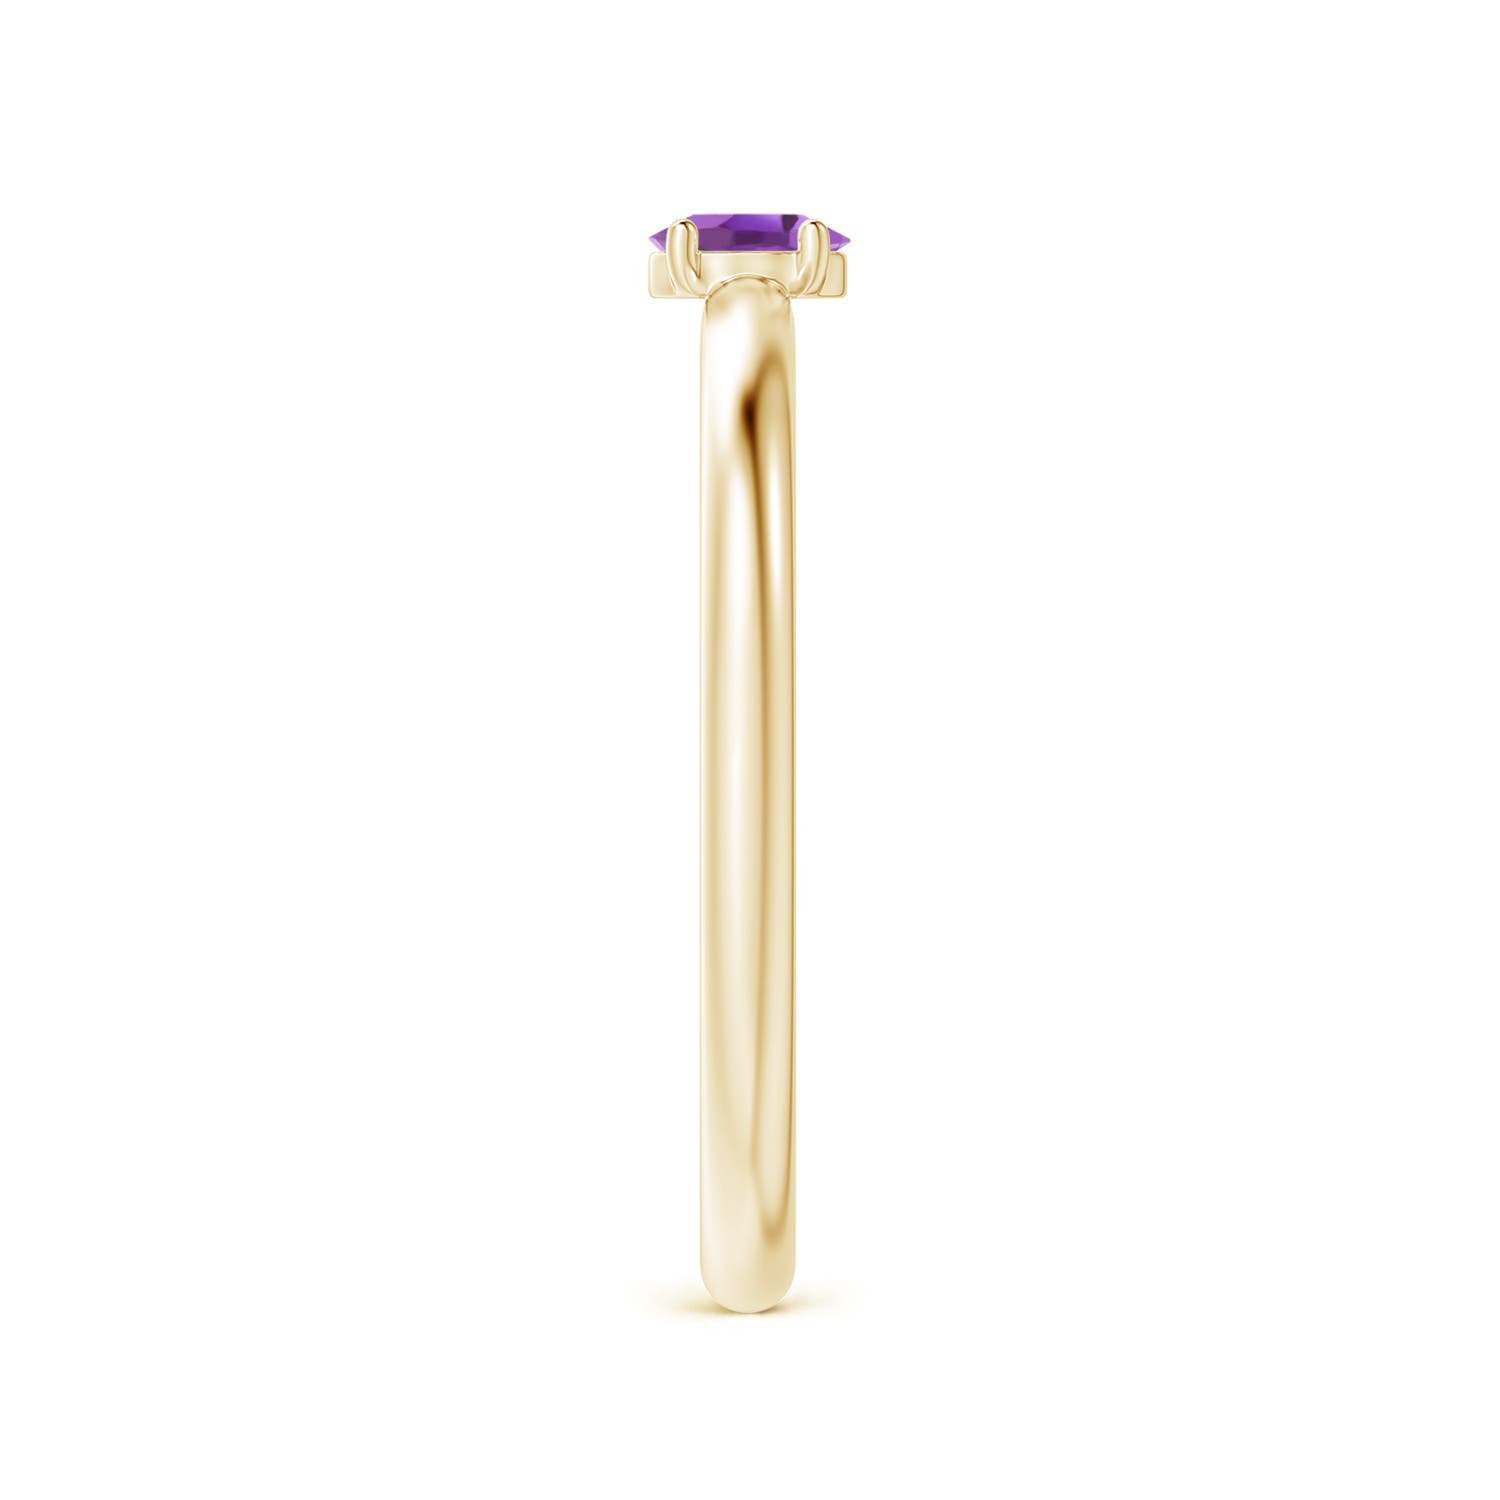 A - Amethyst / 0.14 CT / 14 KT Yellow Gold